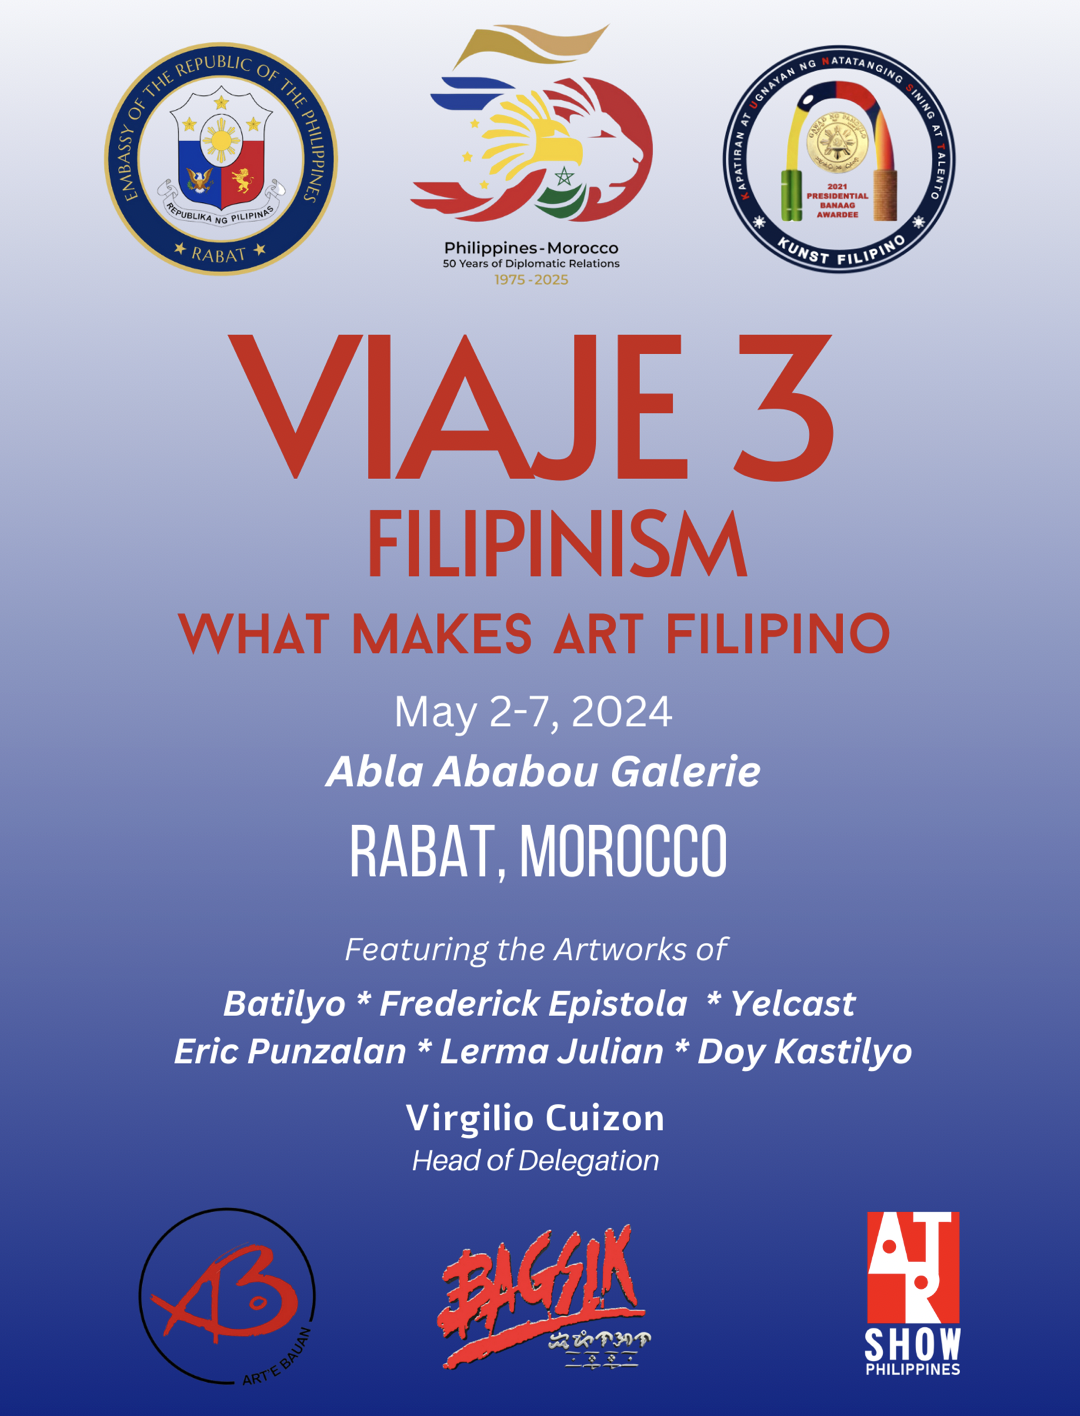 The Viaje 3 Travel Exhibition aims to celebrate the Philippines' rich cultural history meshed with contemporary artistic innovation, presenting a unique opportunity for Filipino art to shine globally. 